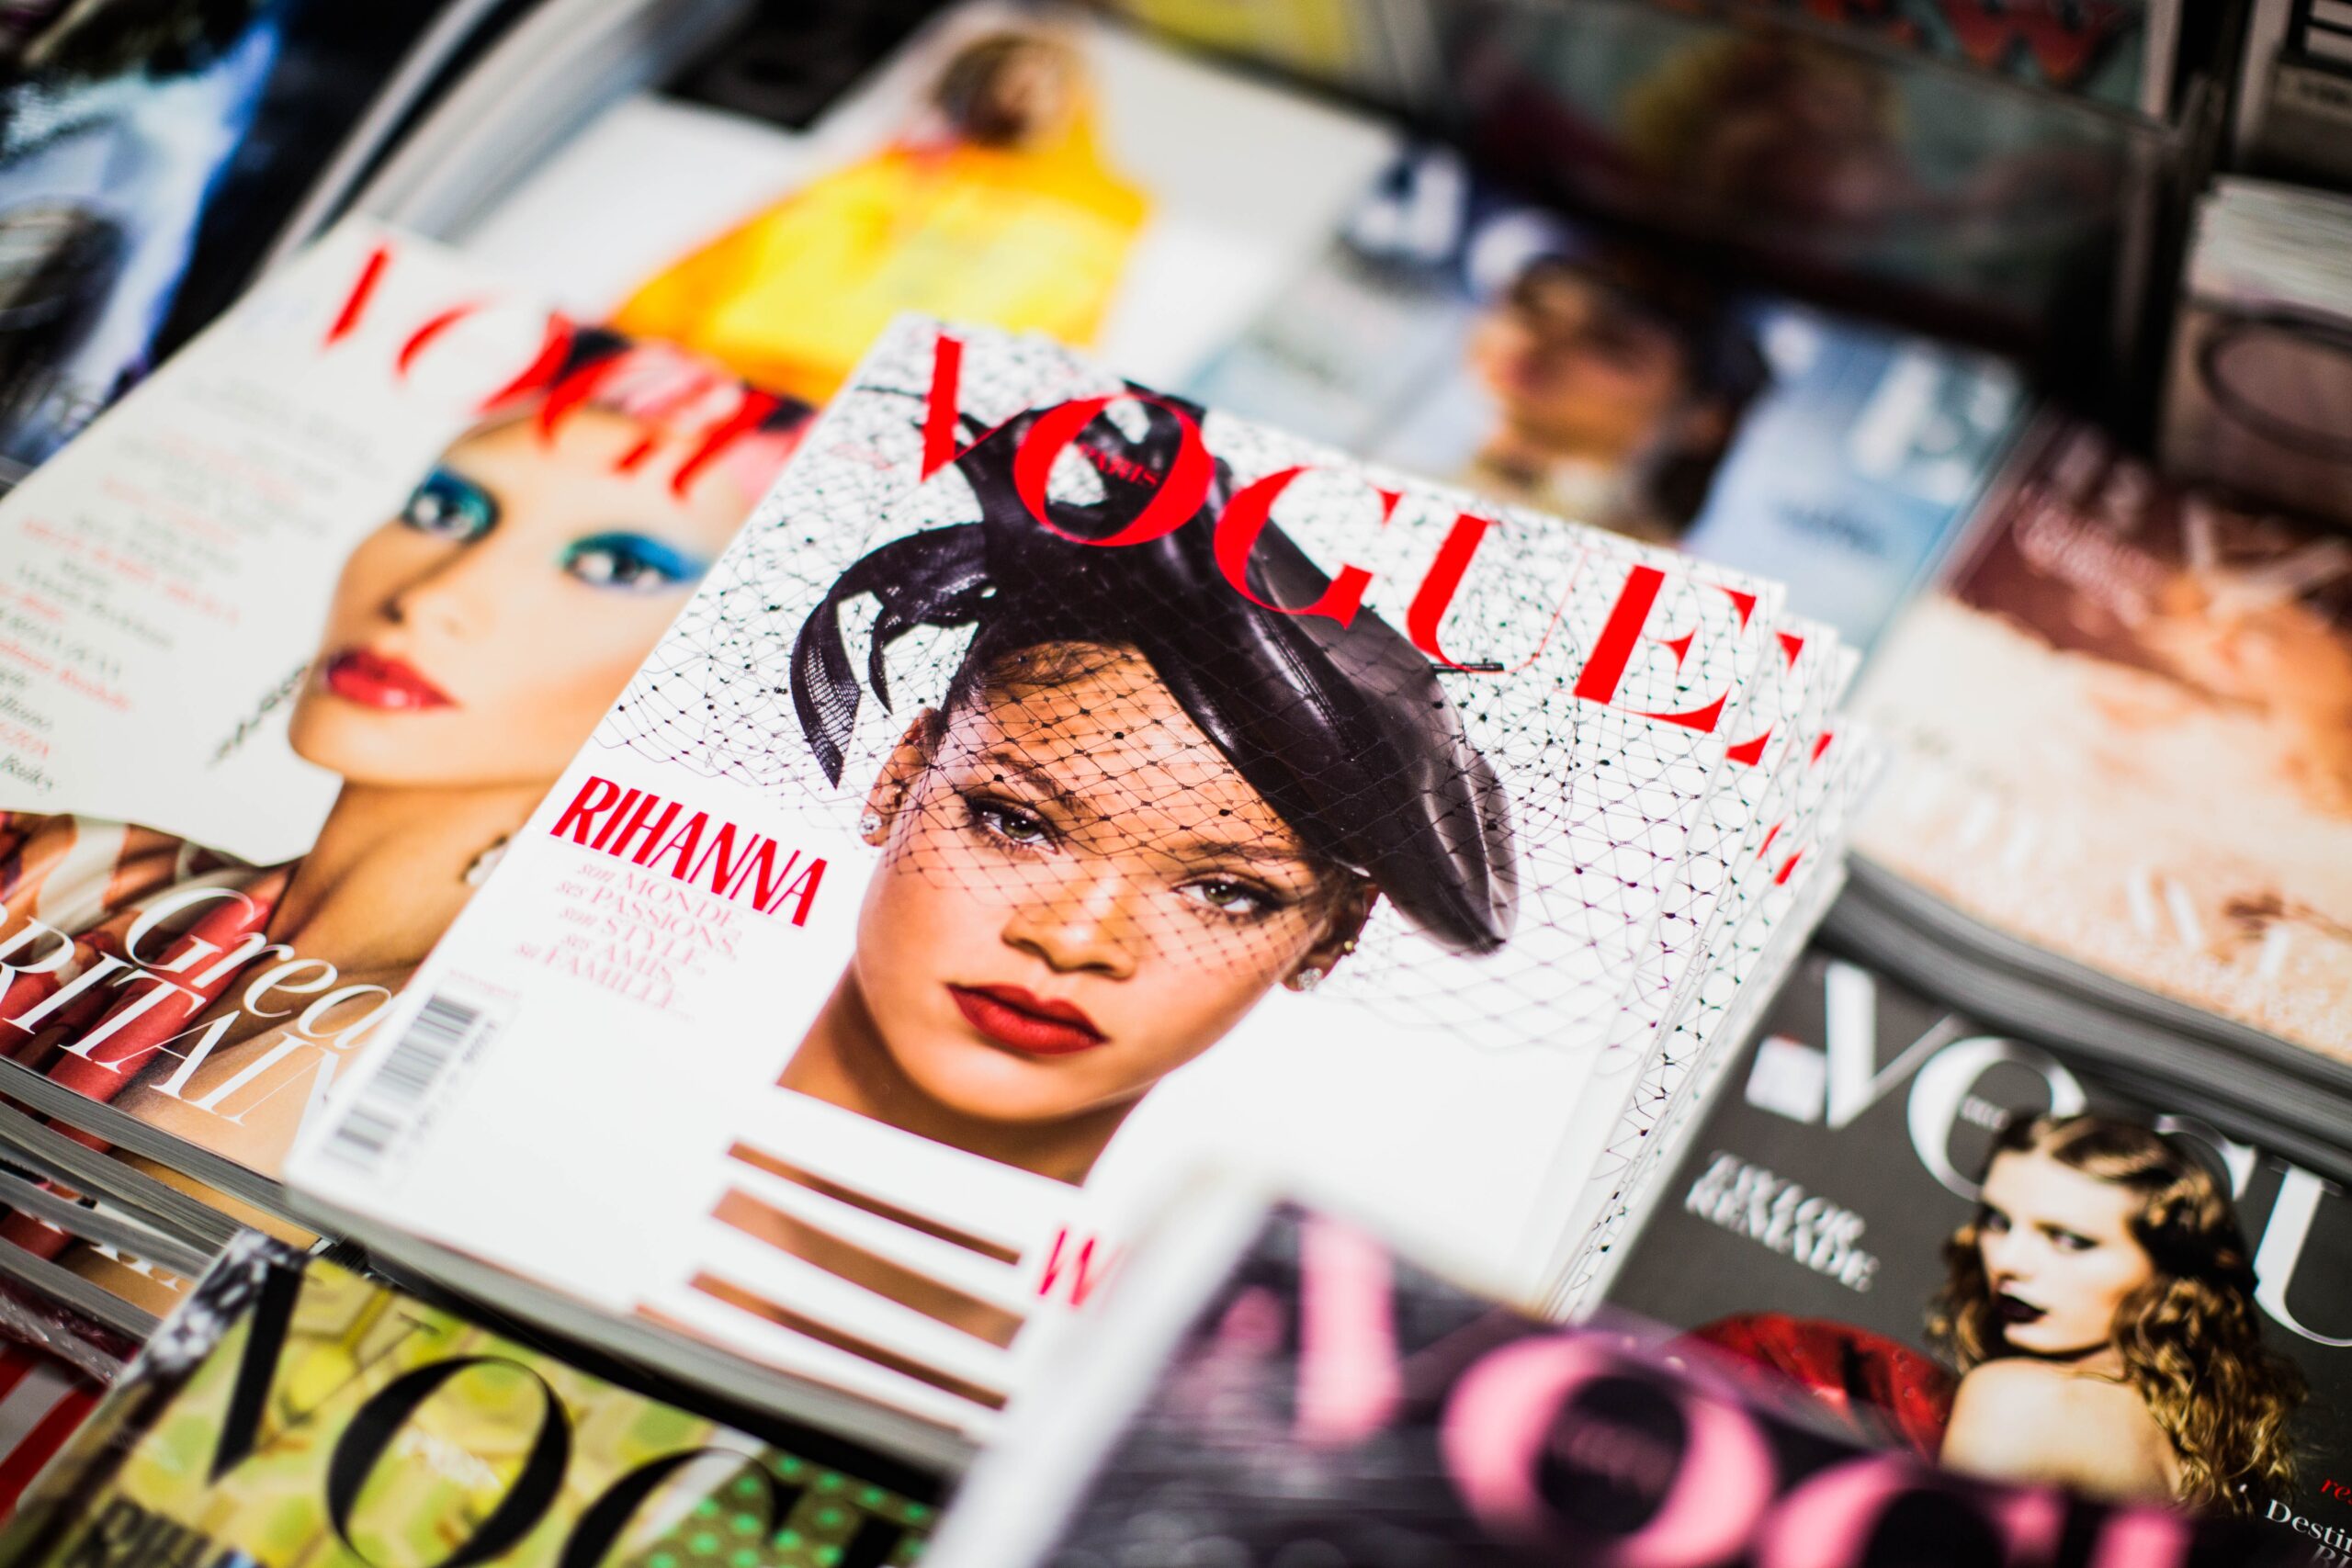 Condé Nast serves up multimedia content on a global scale